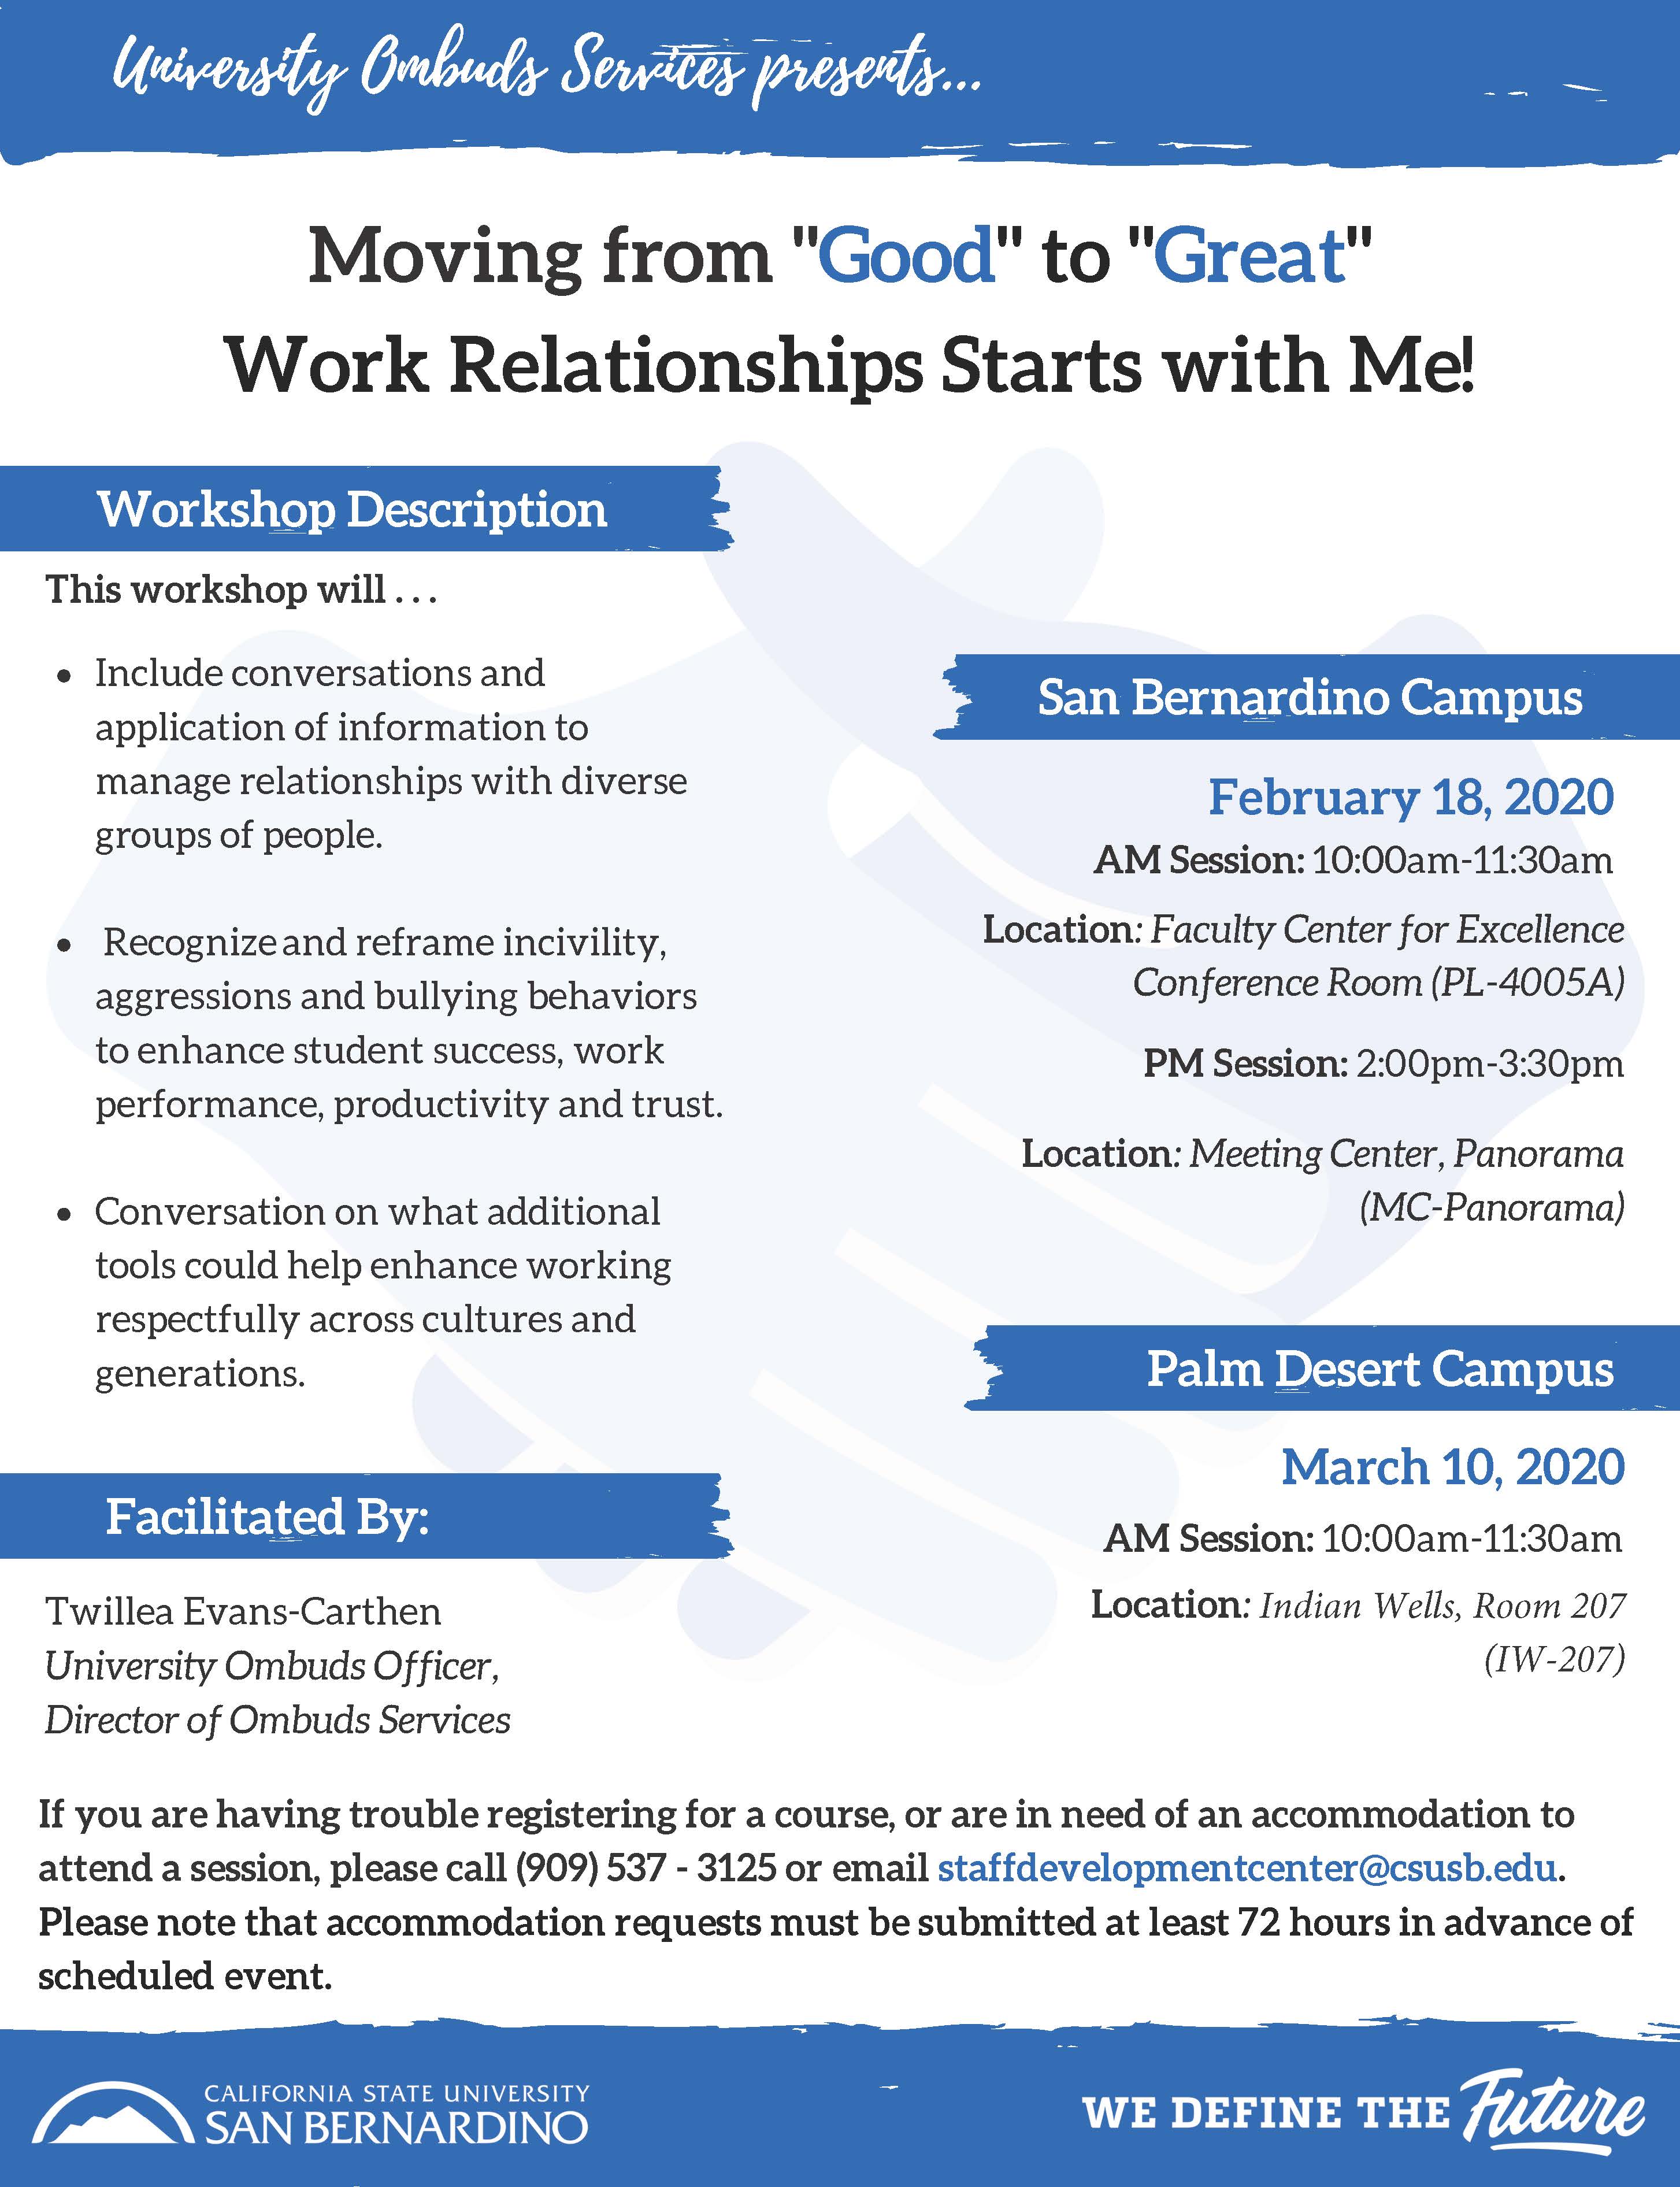 Workshop: Moving from "Good" to "Great" Work Relationships Starts with Me!